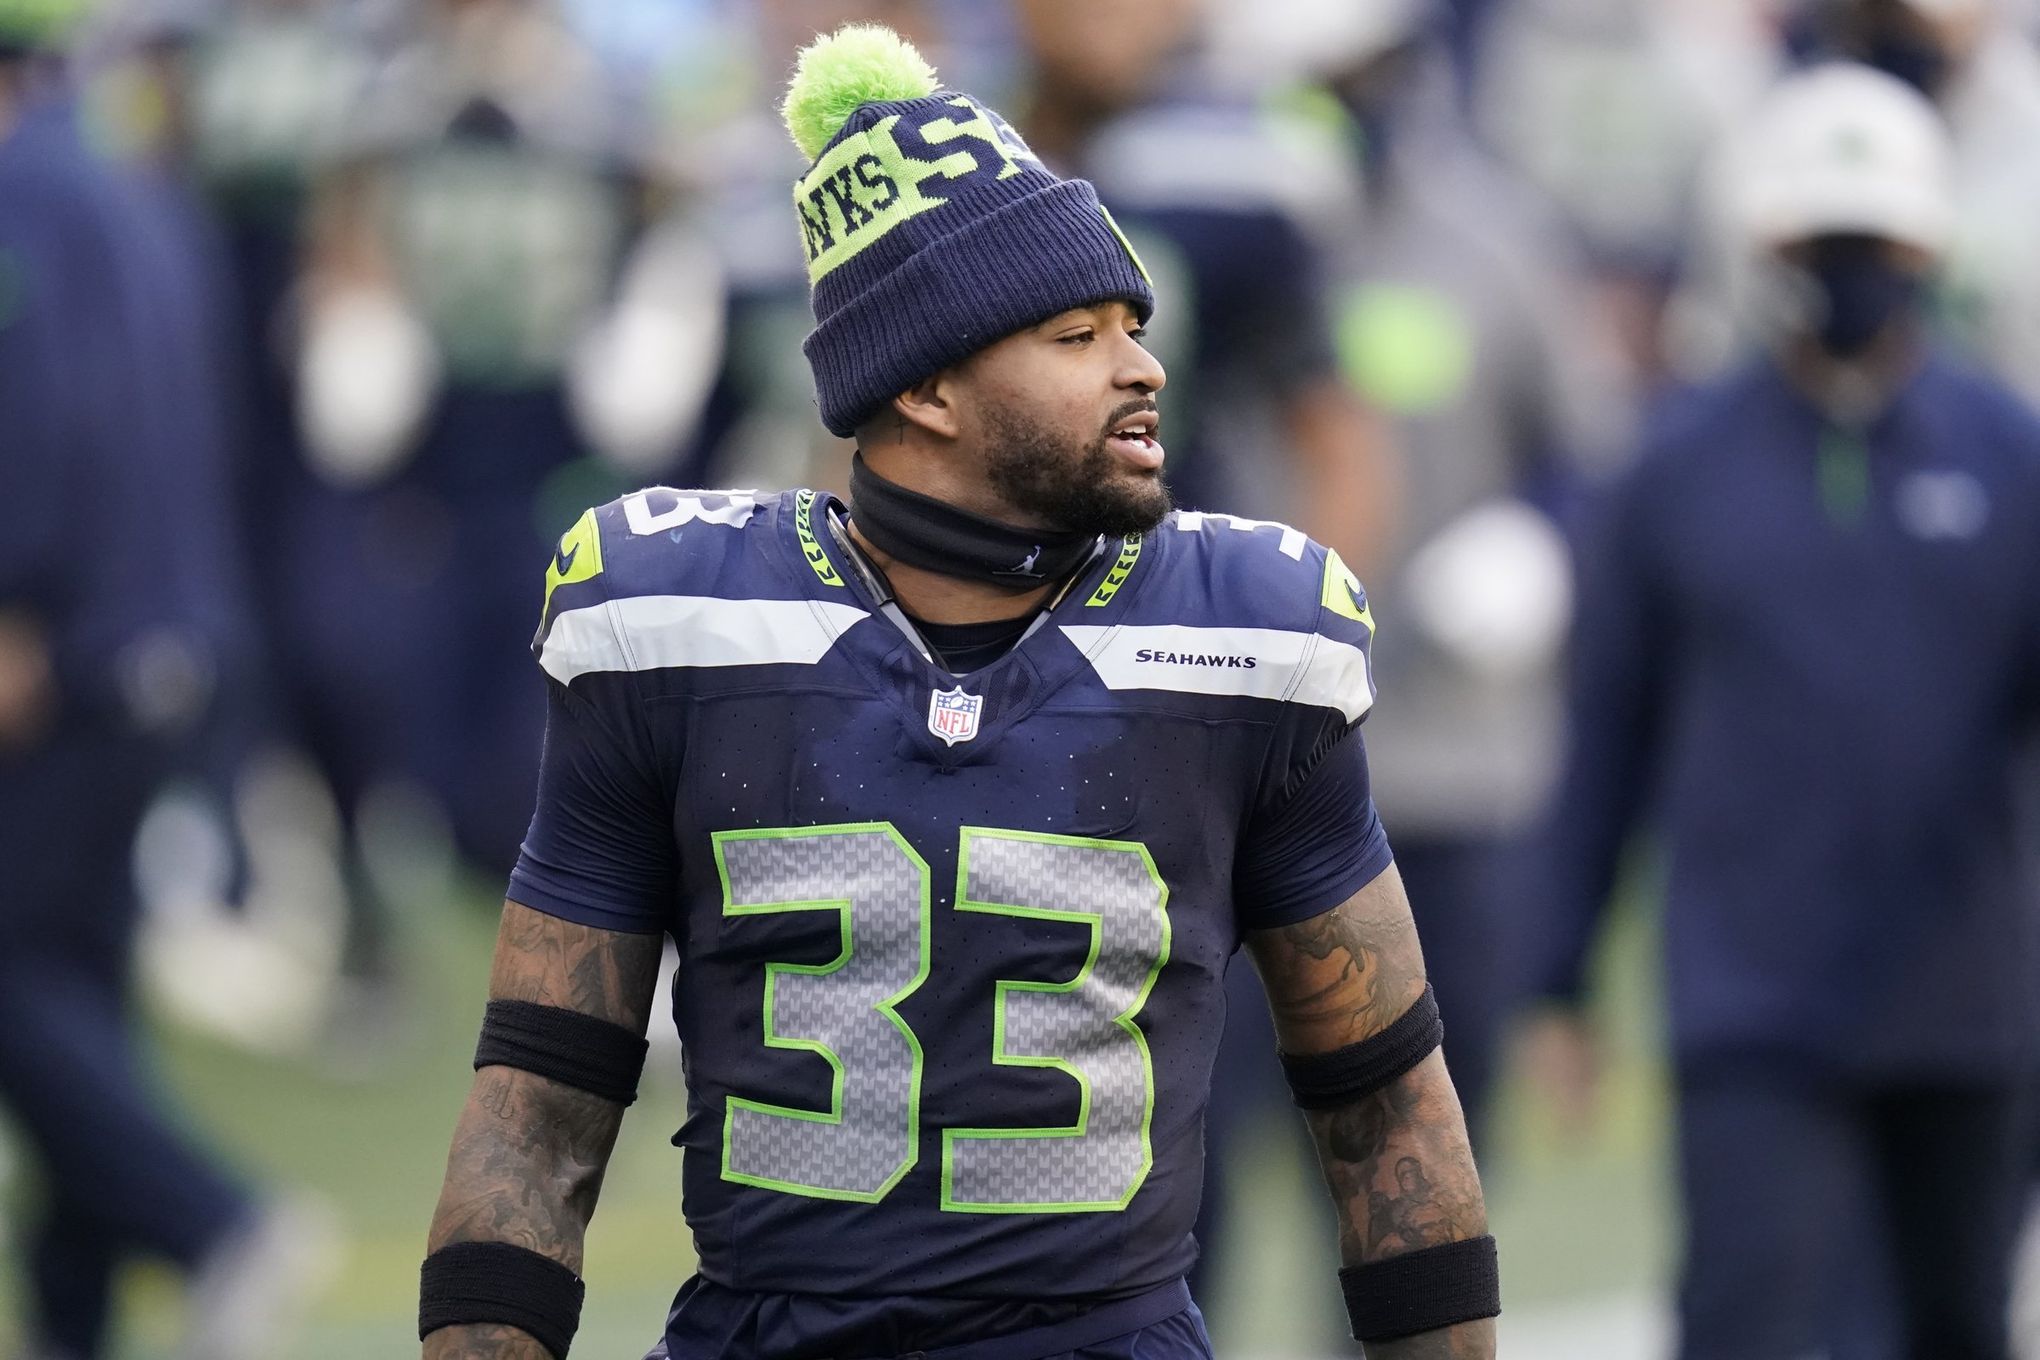 After Seahawks' Jamal Adams injures left shoulder, Pete Carroll says 'we'll  see' if Adams plays vs. Rams | The Seattle Times